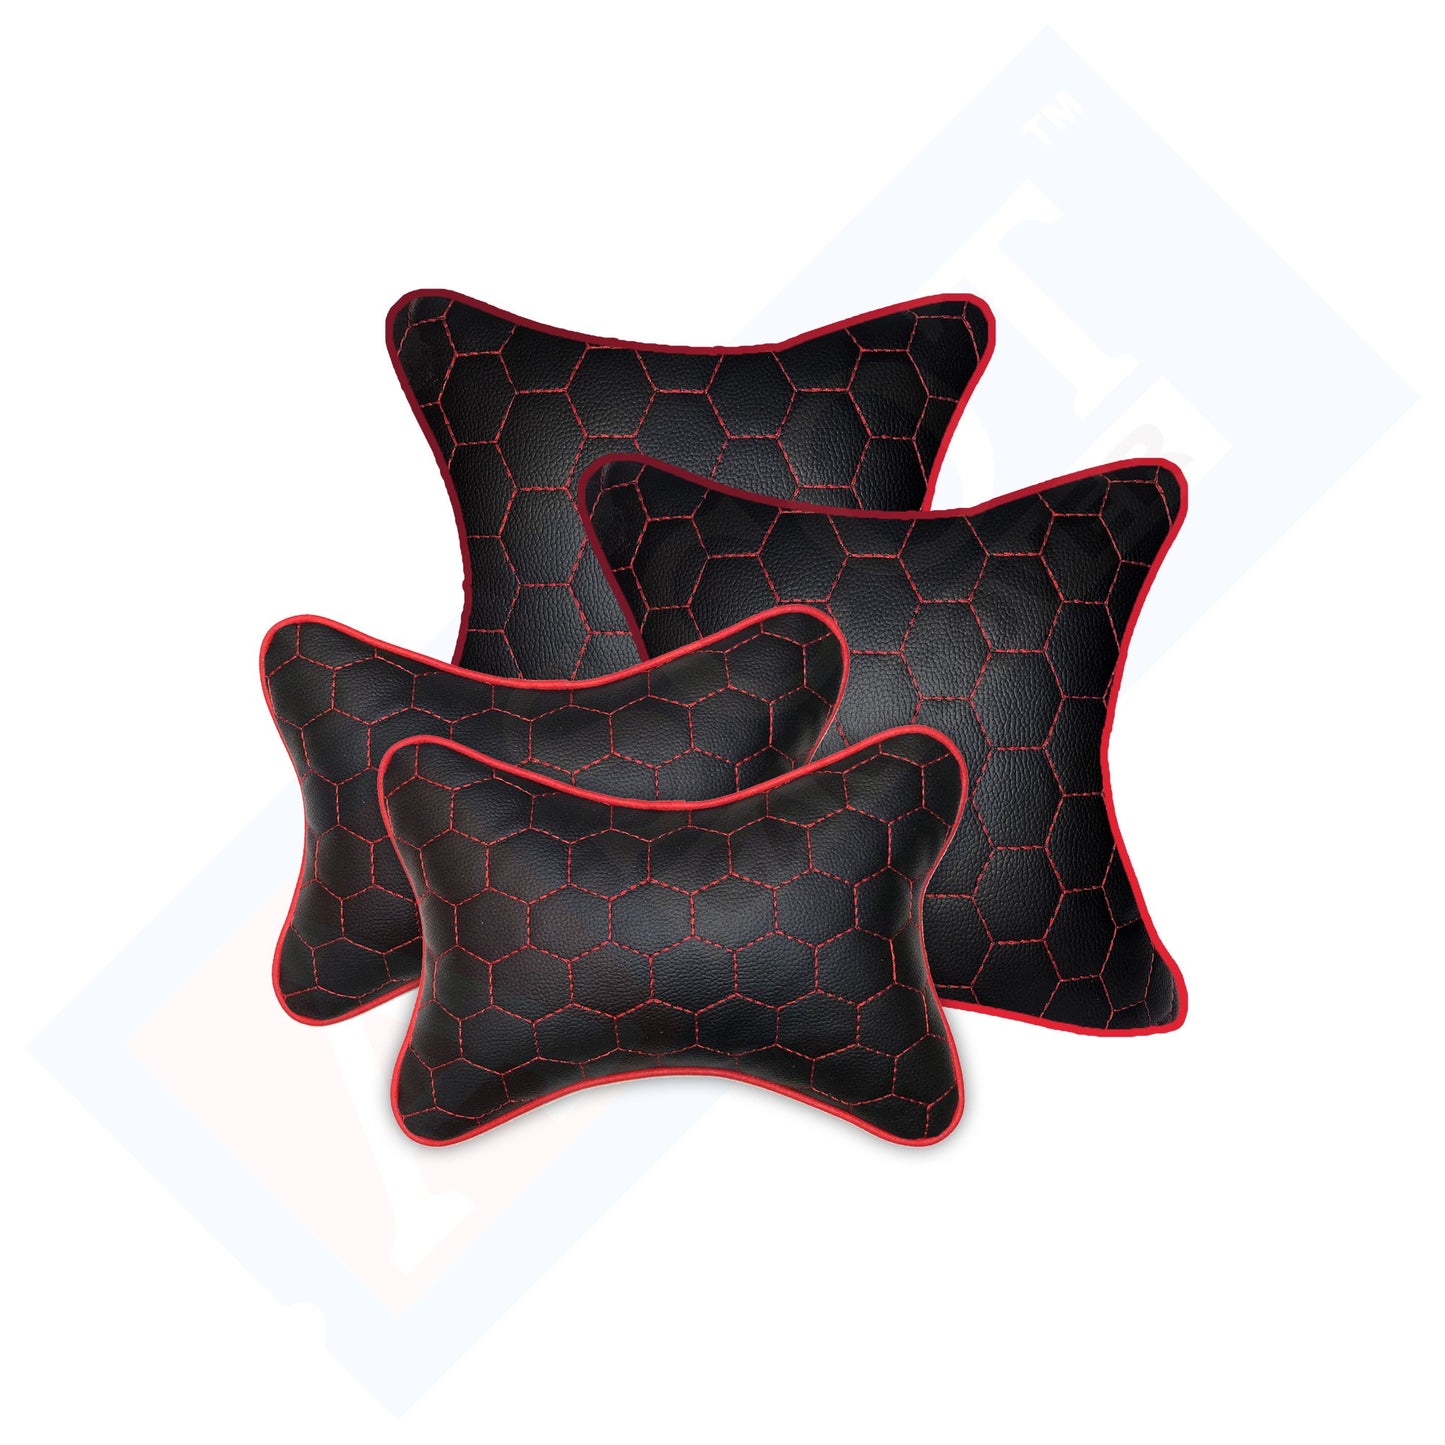 Ascot Breathable Cushion & Neck Rest Pillow for Home & Car Black & Red 2 Combo Set of 4 Pieces (2+2) Comfortable & Soft for Travel